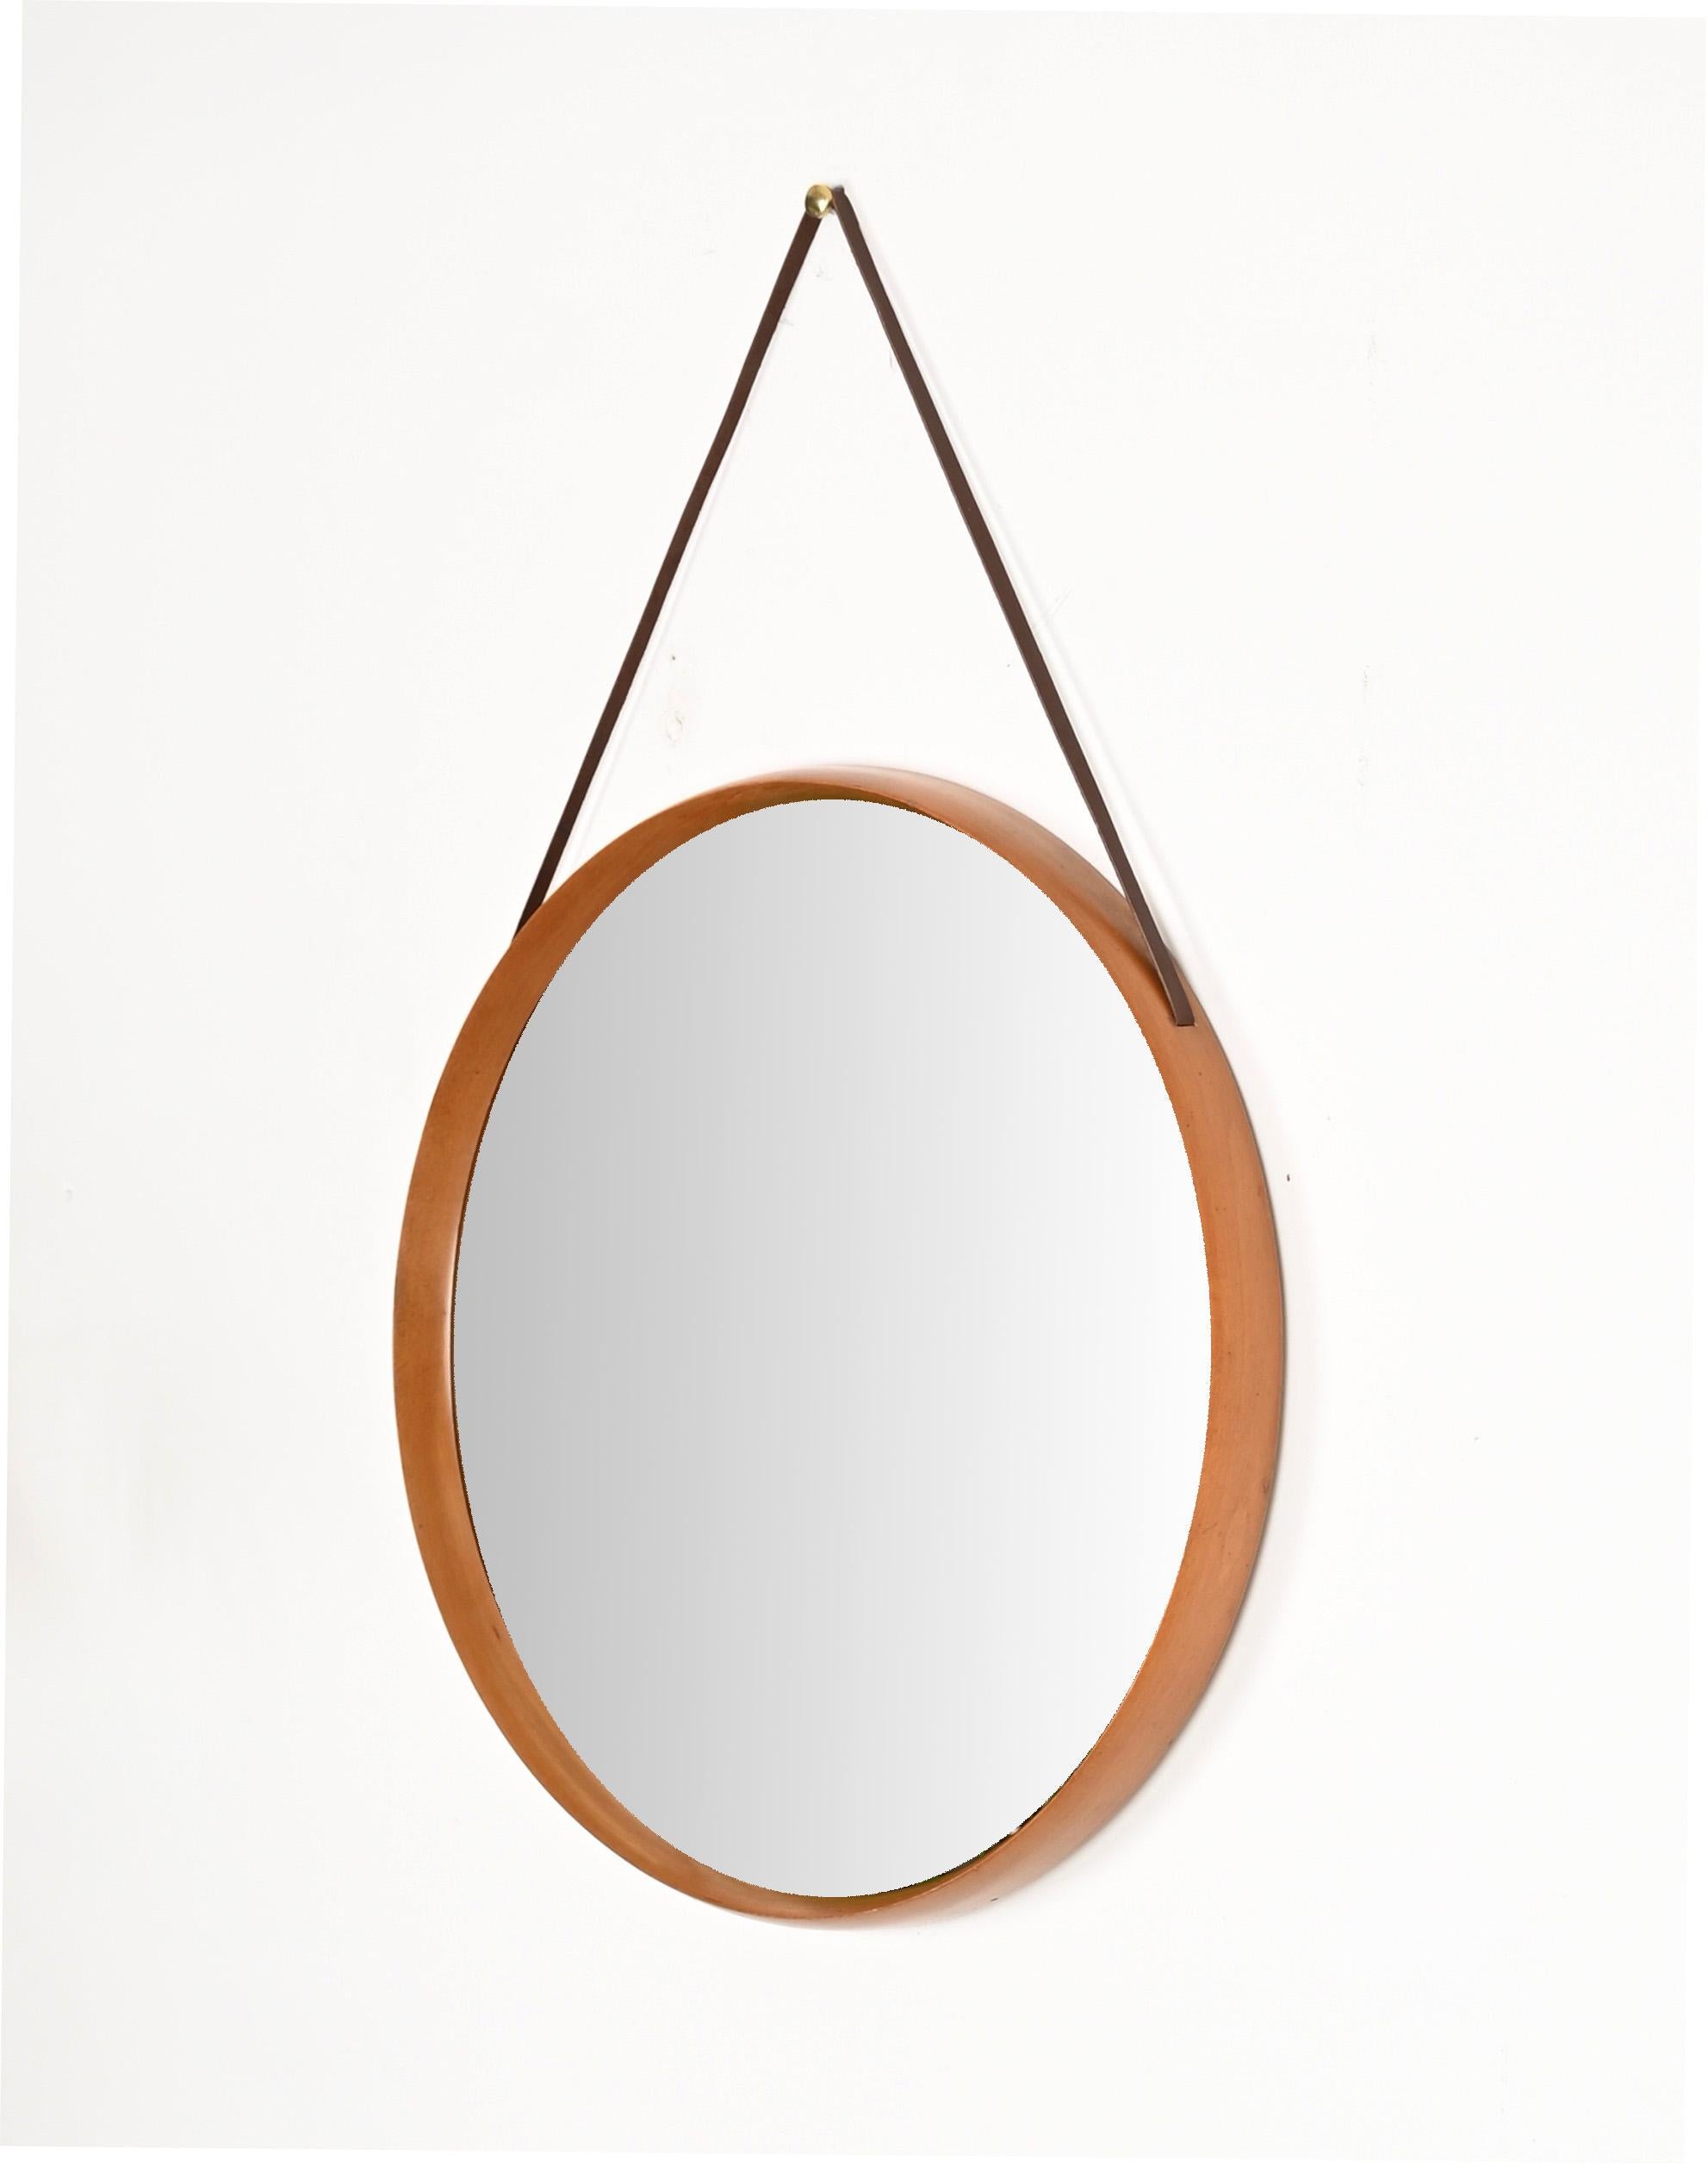 Hand-Crafted Mid-Century Stildomus Round Wall Mirror in Walnut and Leather, Italy, 1960s For Sale